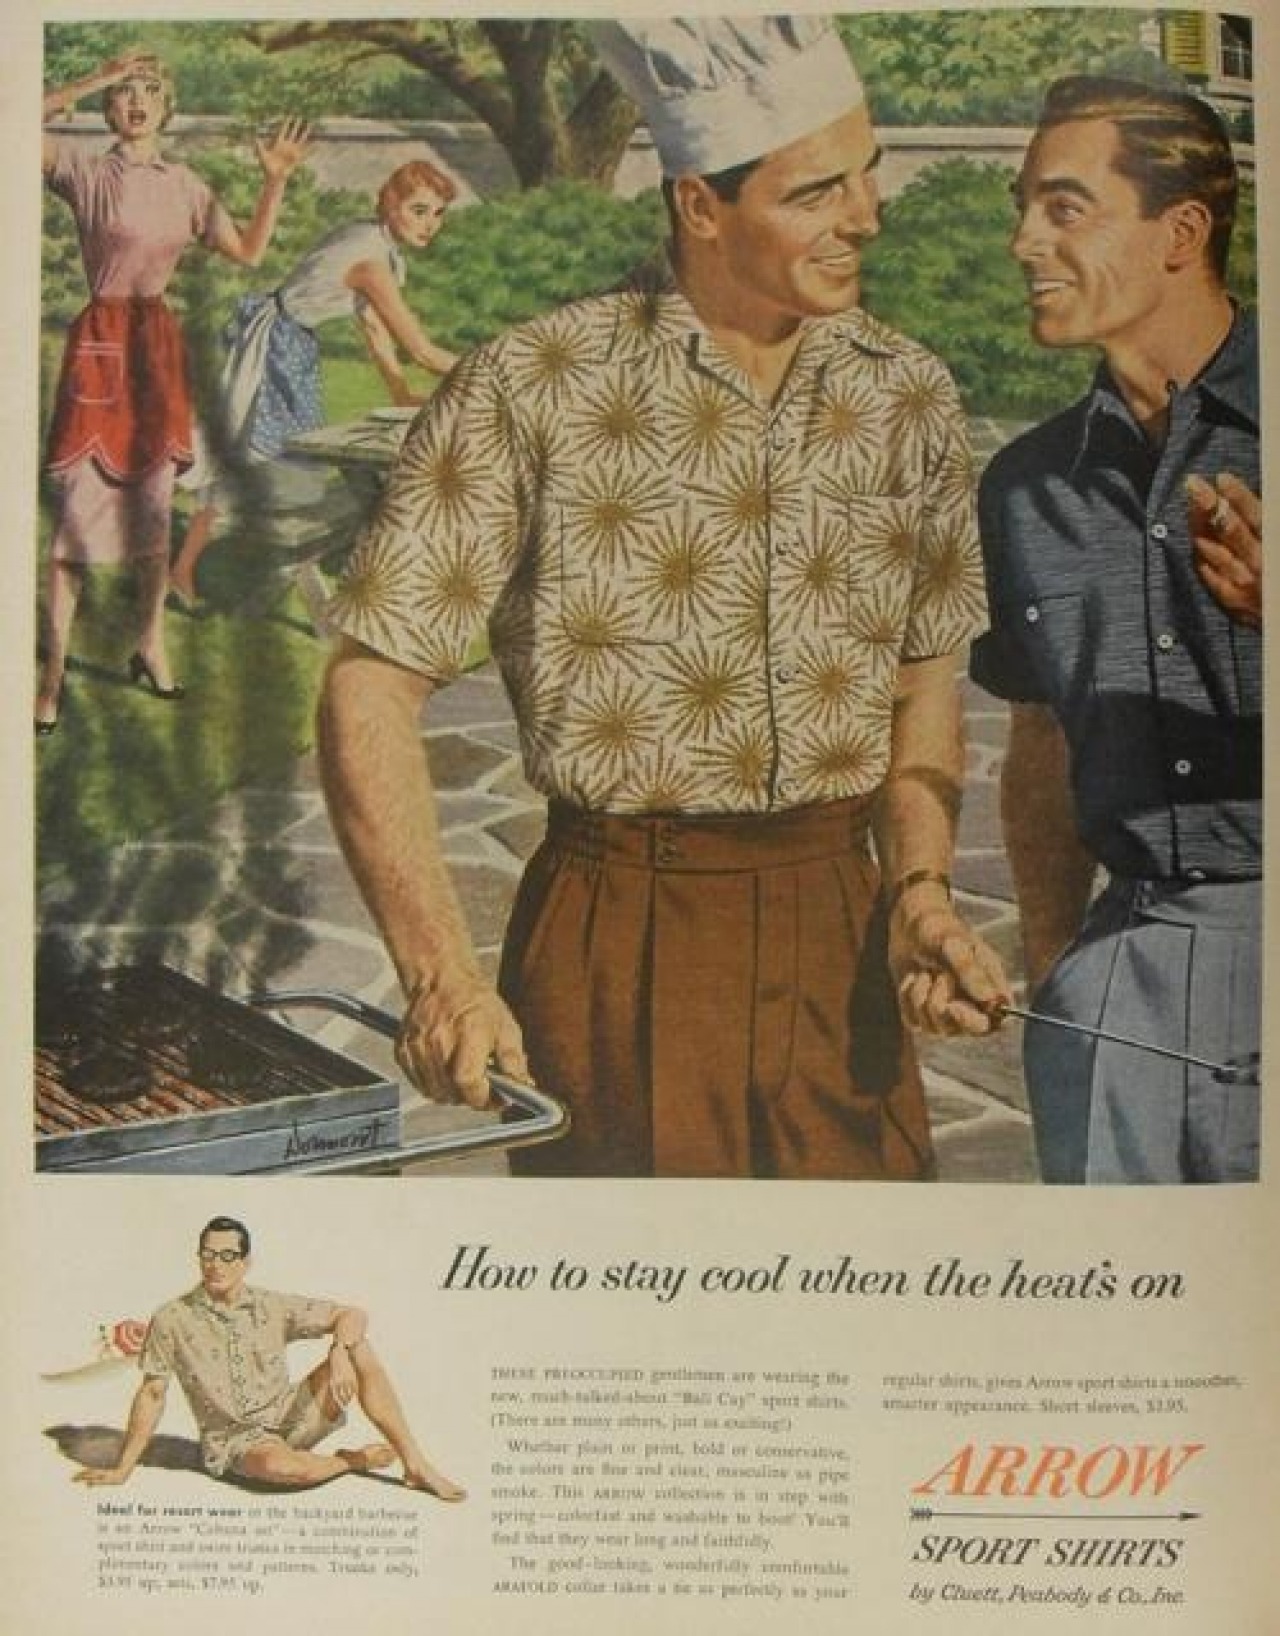 A Look Back at Fashion Ads from the 1950s - Attire Club by Fraquoh